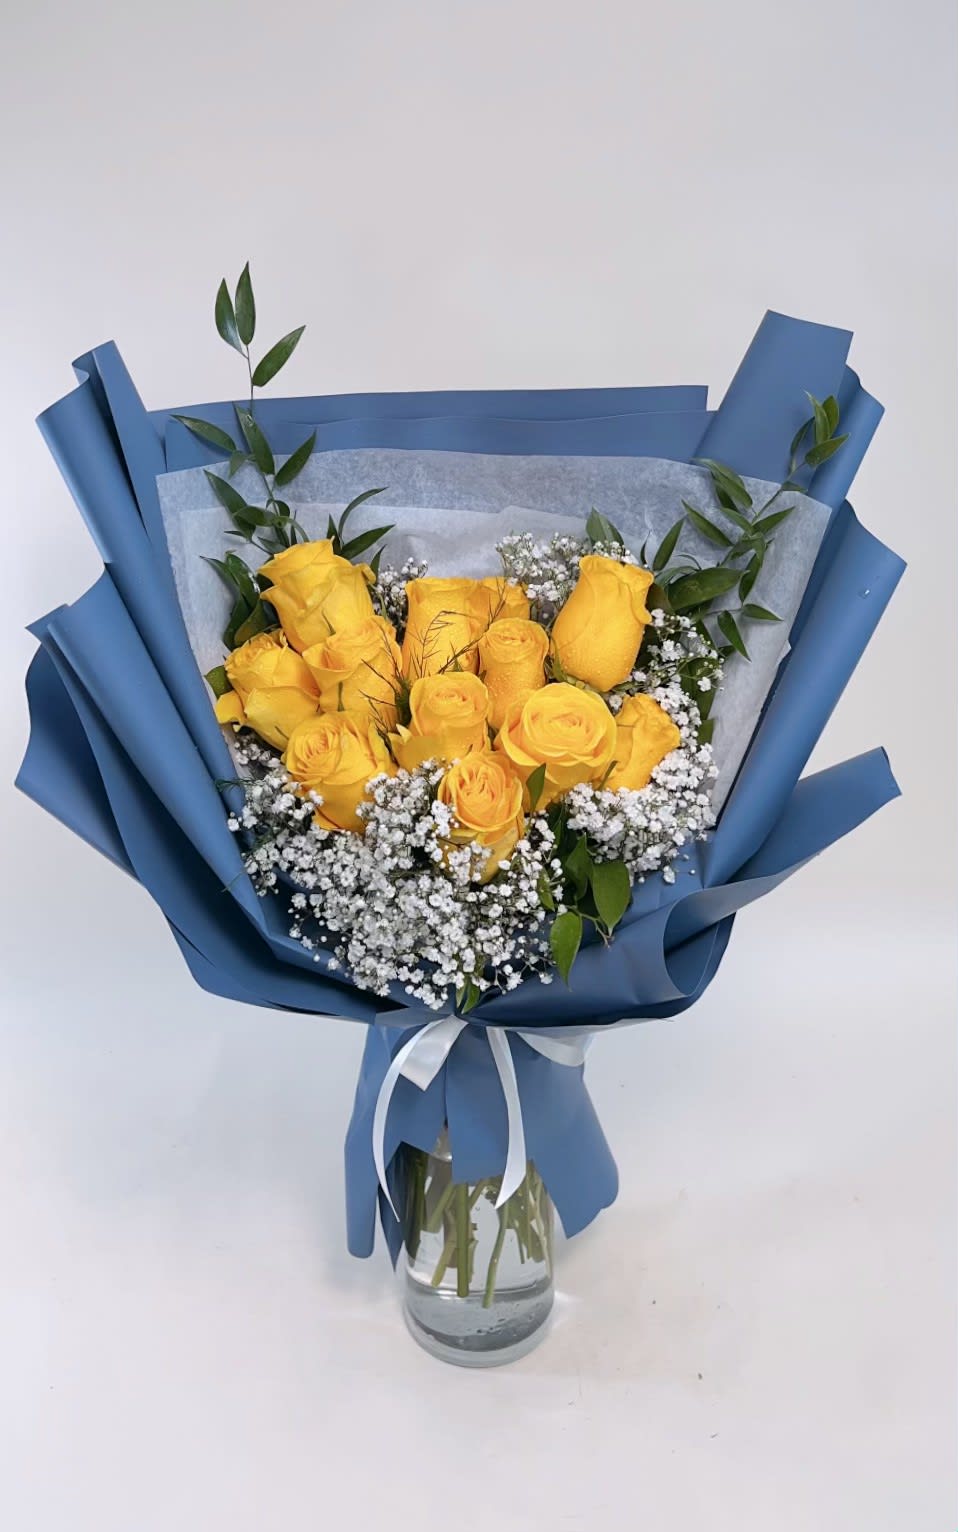 12 yellow roses wrapped is so simple and classic!